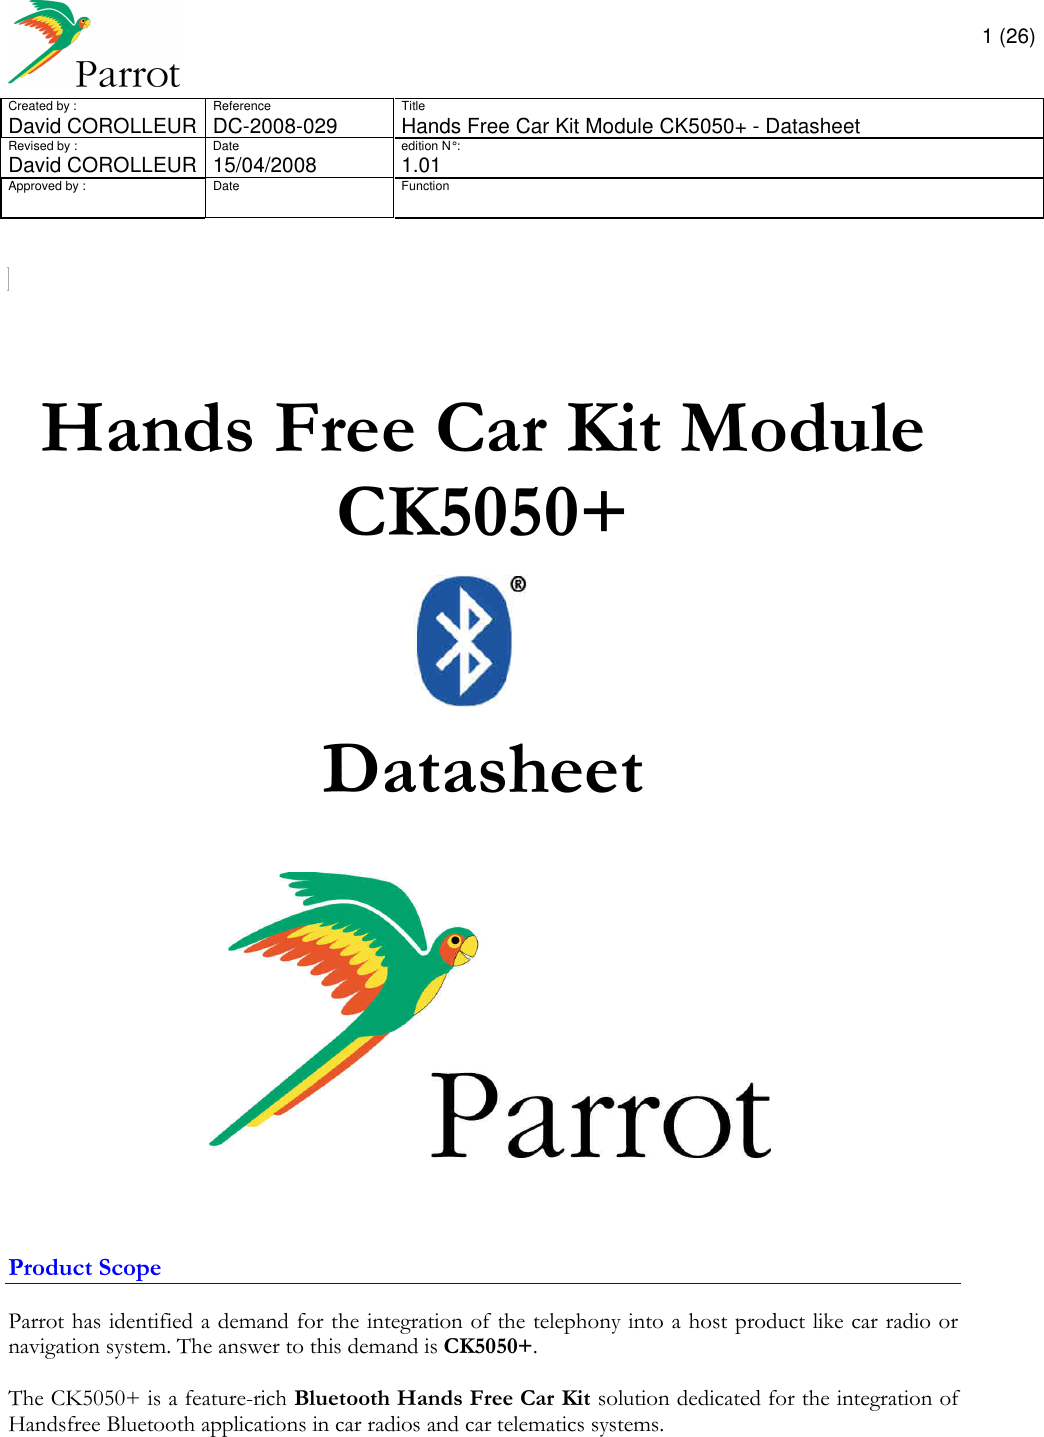       1 (26) Created by :  Reference  Title David COROLLEUR  DC-2008-029  Hands Free Car Kit Module CK5050+ - Datasheet  Revised by :  Date  edition N° :  David COROLLEUR 15/04/2008   1.01 Approved by :  Date  Function                       Hands Free Car Kit Module CK5050+    Datasheet       Product Scope  Parrot has identified a demand for the integration of the telephony into a host product like car radio or navigation system. The answer to this demand is CK5050+.  The CK5050+ is a feature-rich Bluetooth Hands Free Car Kit solution dedicated for the integration of Handsfree Bluetooth applications in car radios and car telematics systems.       